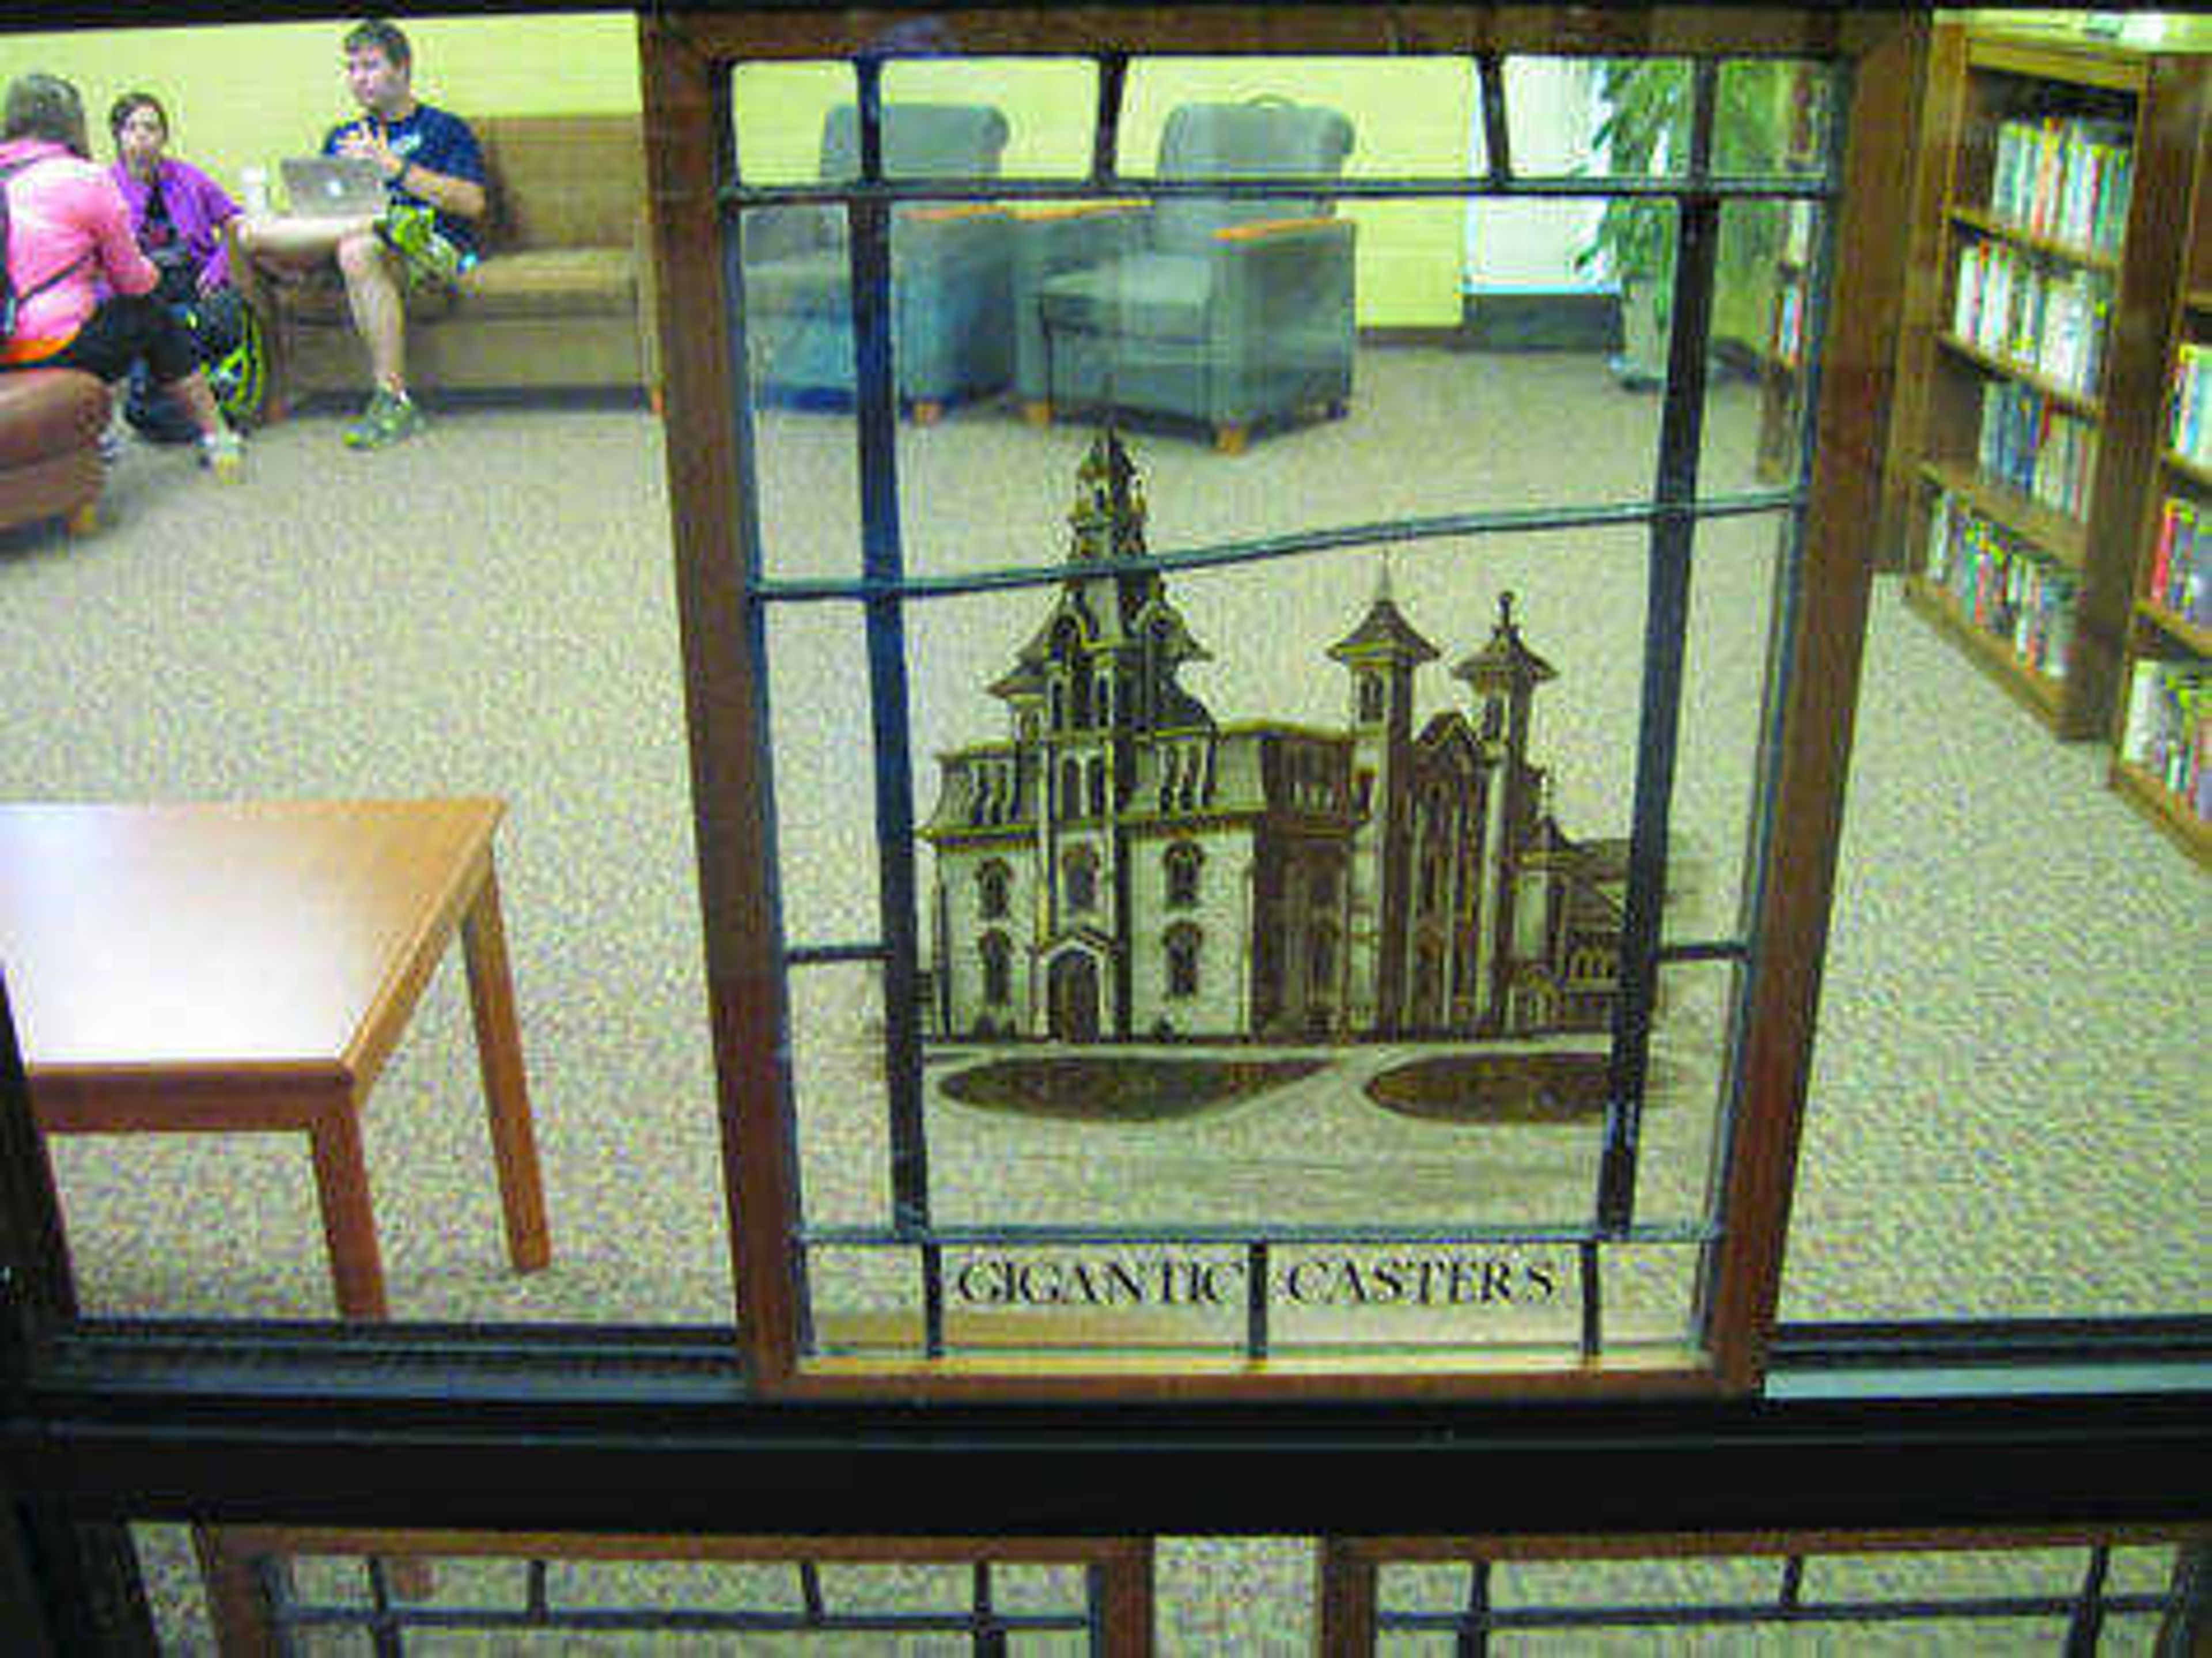 One of the panels from the stained glass collection to be displayed bears the title "Gigantic Casters." Photo by Andrew Tyahla